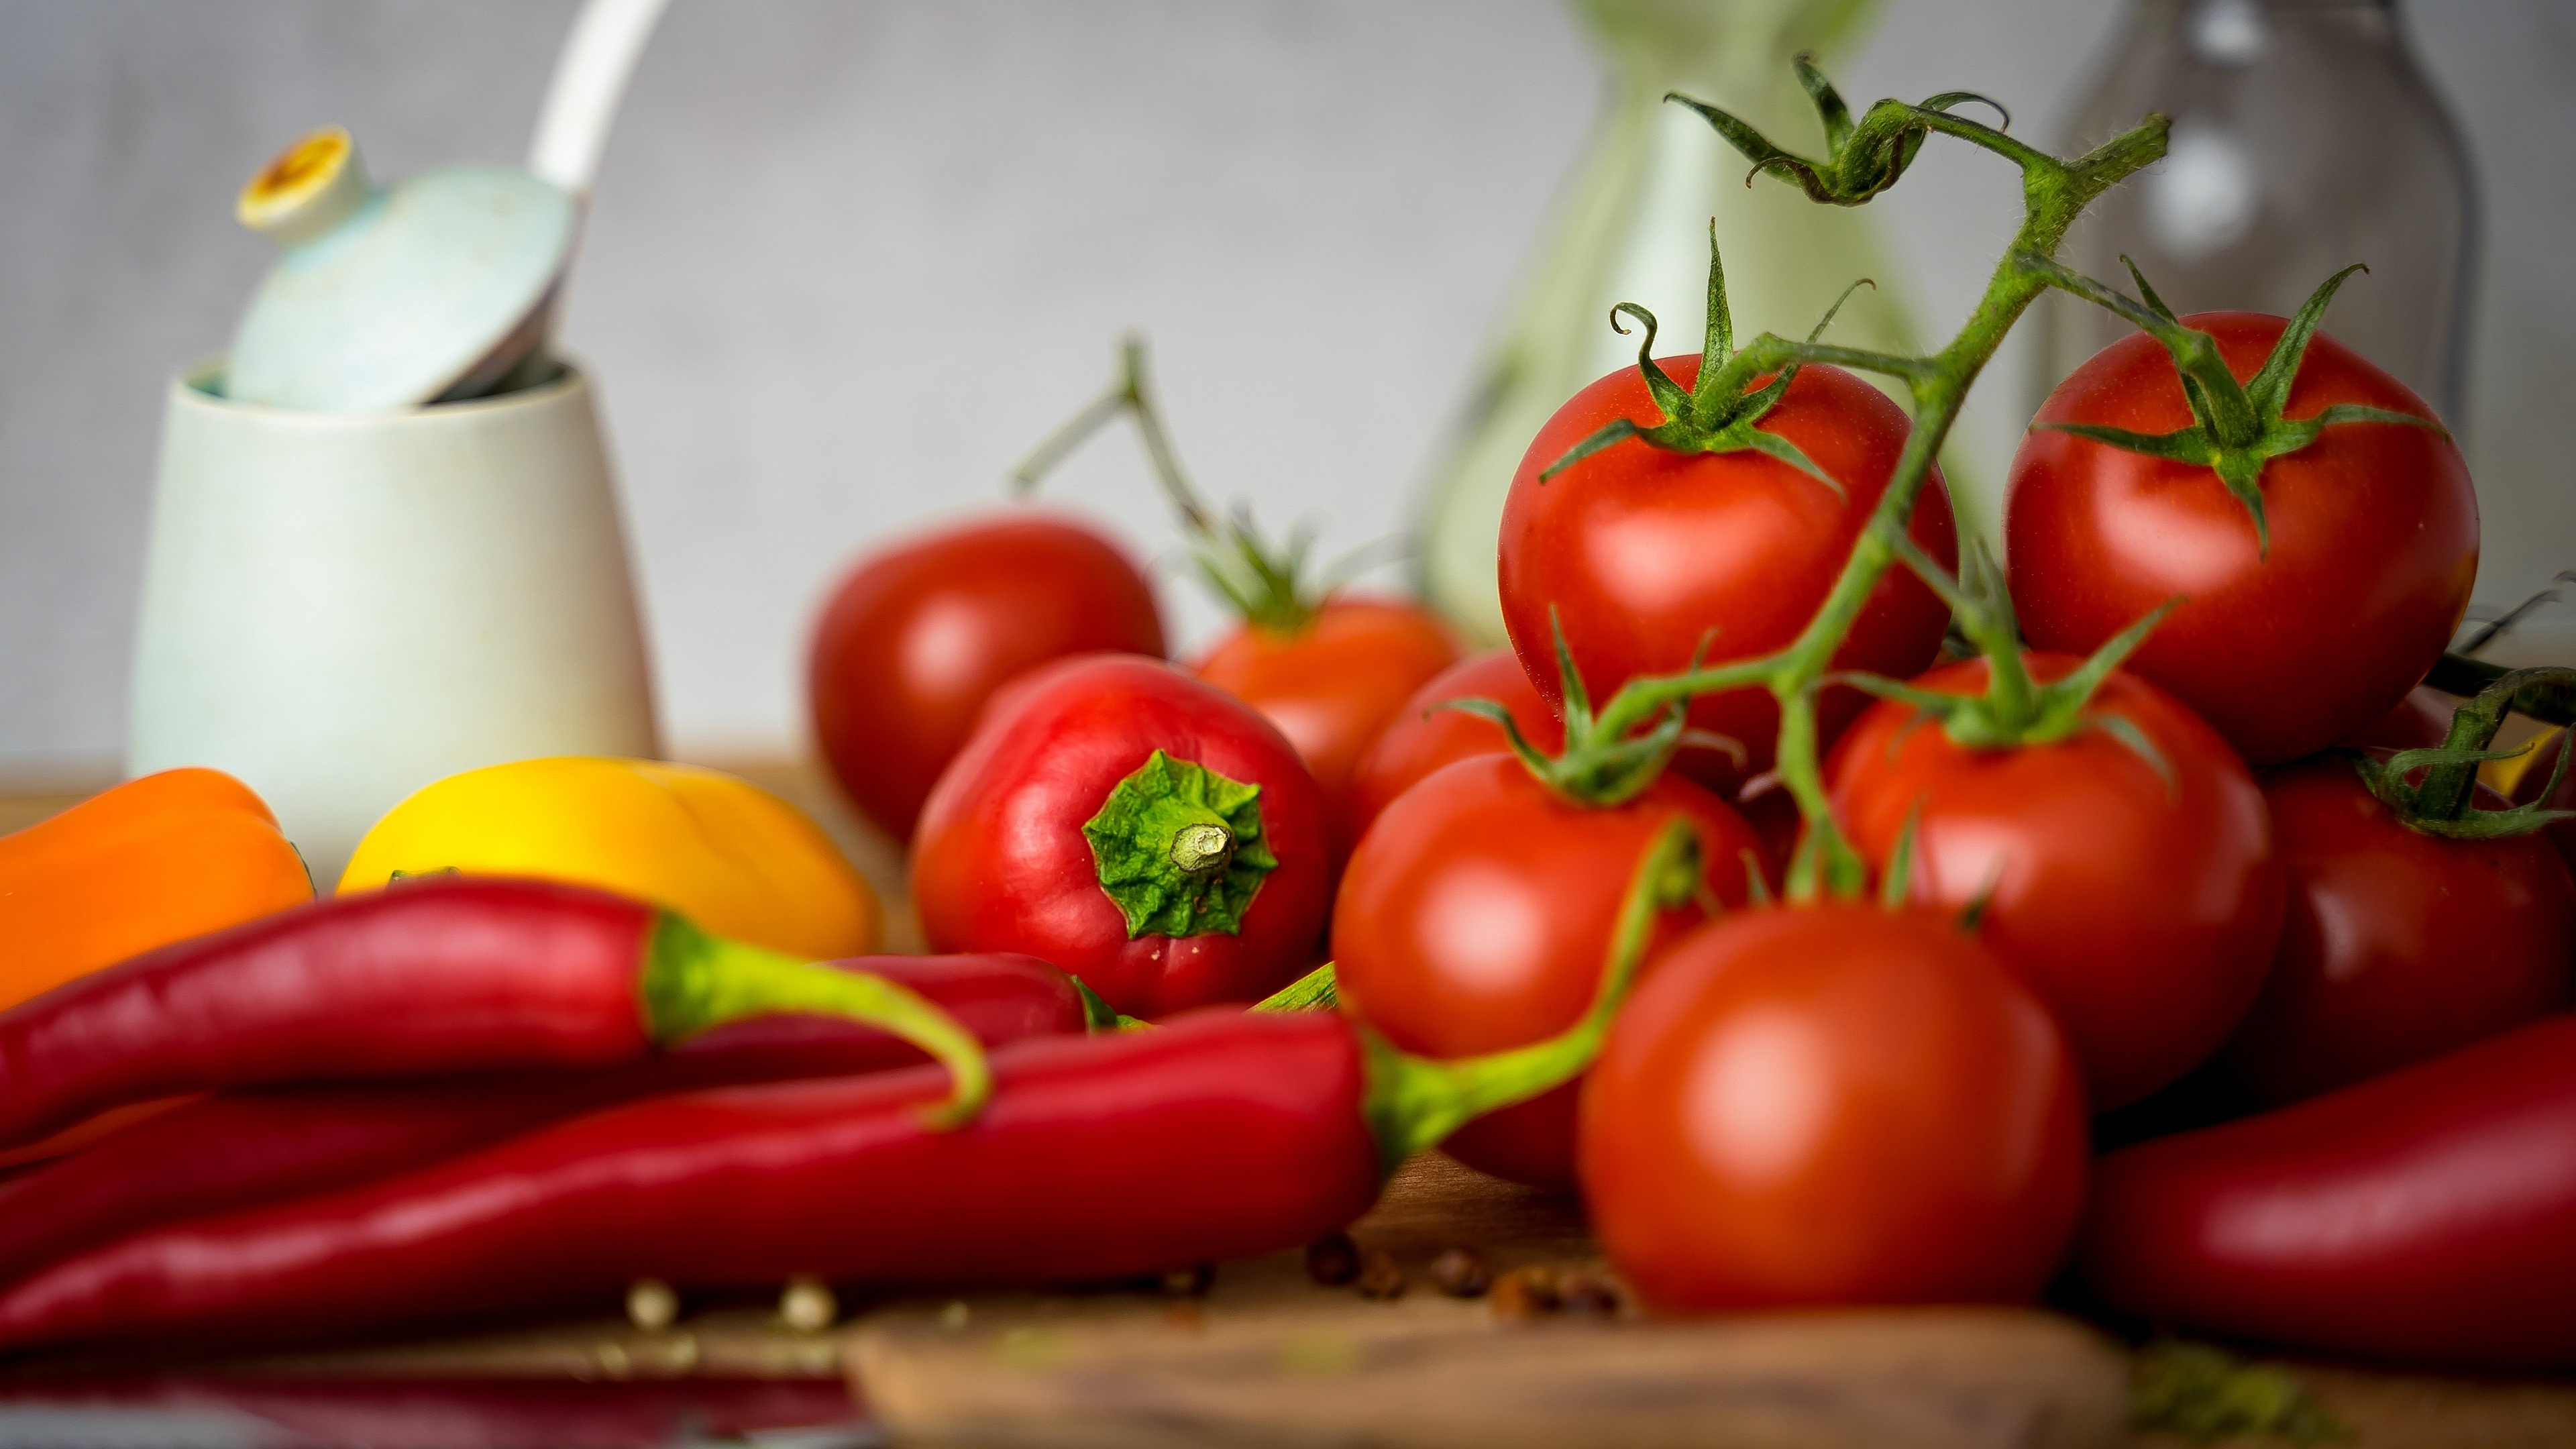 Vegetables: Tomato, Solanum lycopersicum, cultivated extensively for its edible fruits. 3840x2160 4K Background.